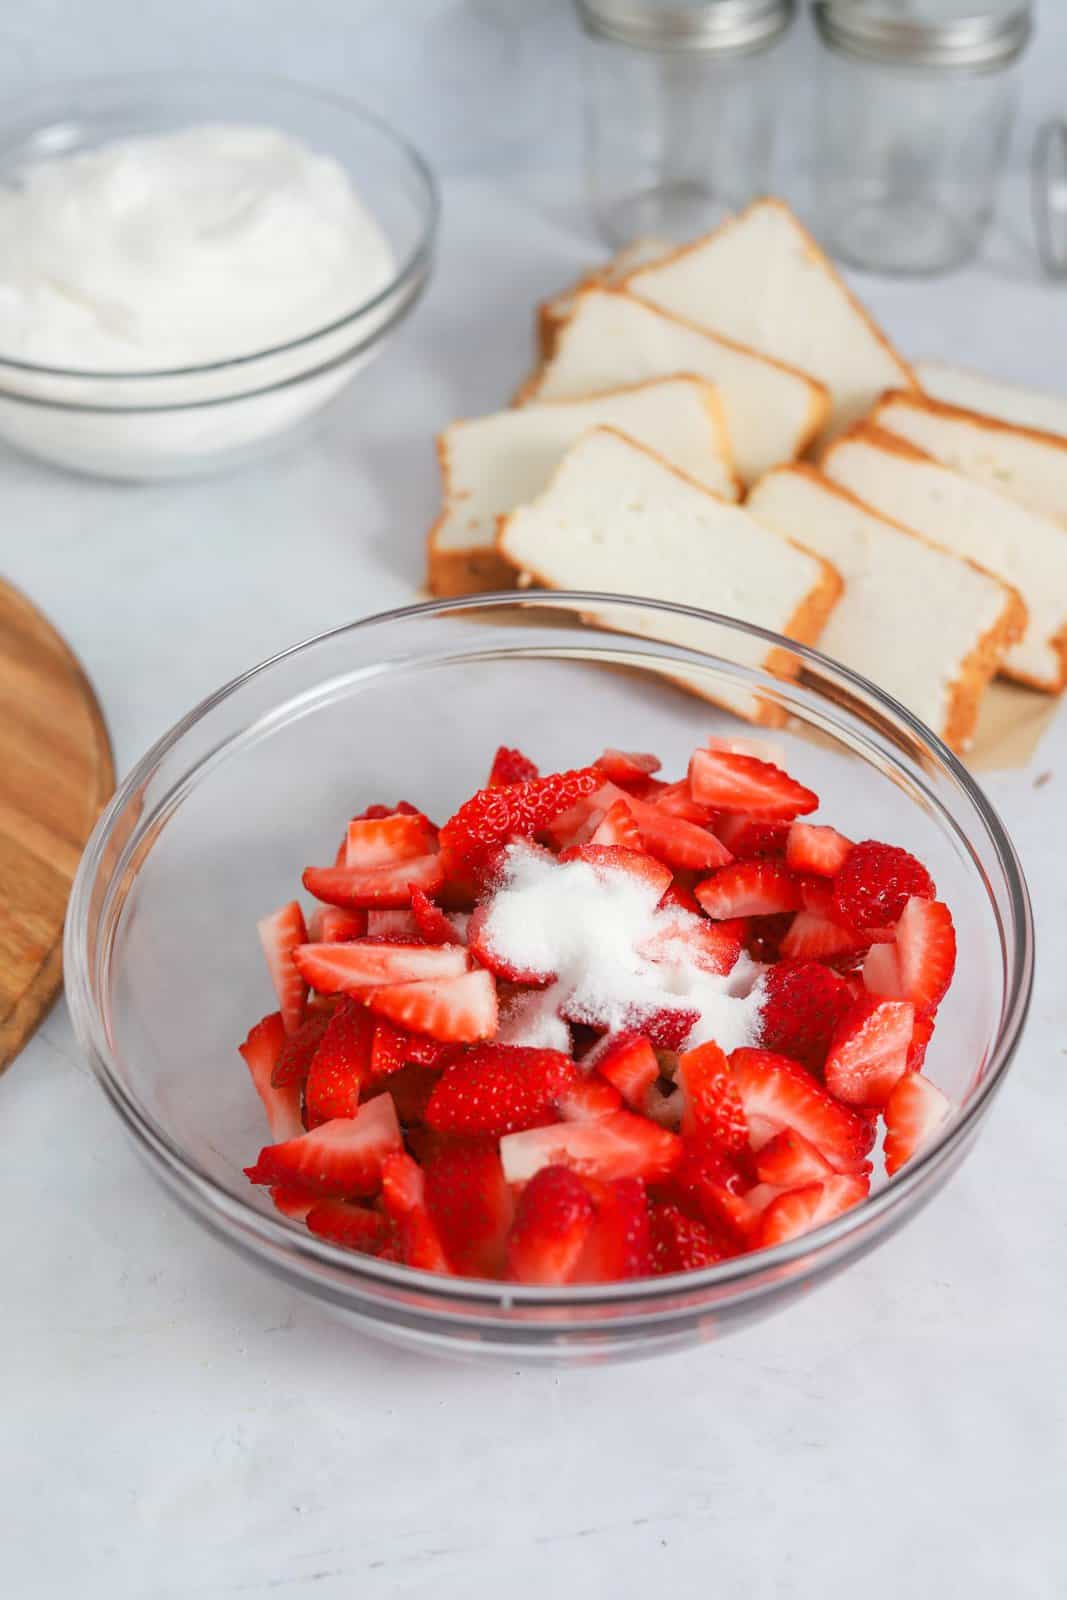 Strawberries and sugar added to bowl.